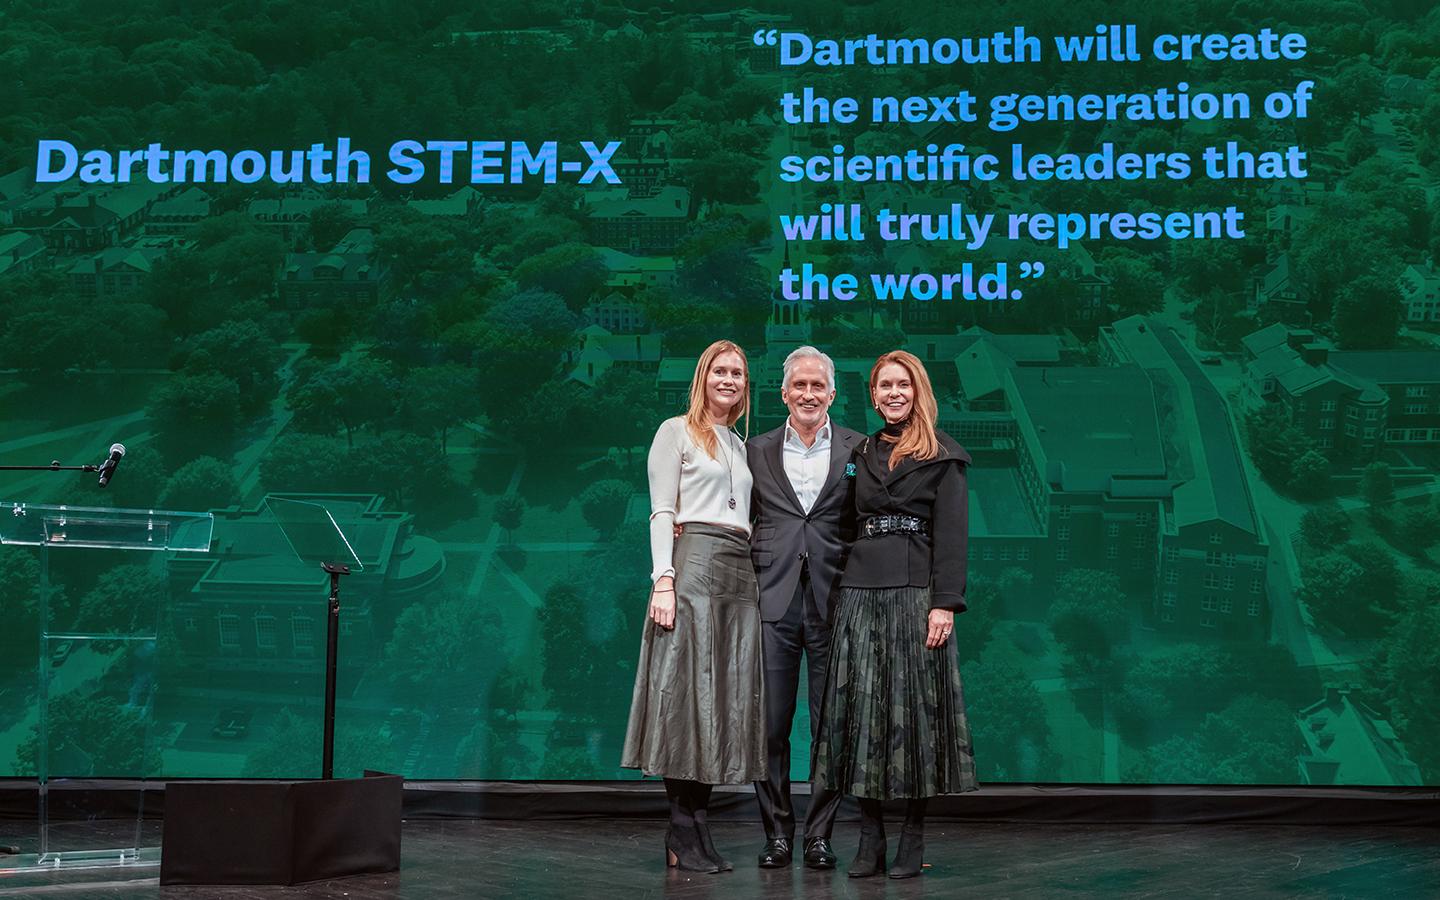 Coulter family on stage at the San Francisco event after the announcement